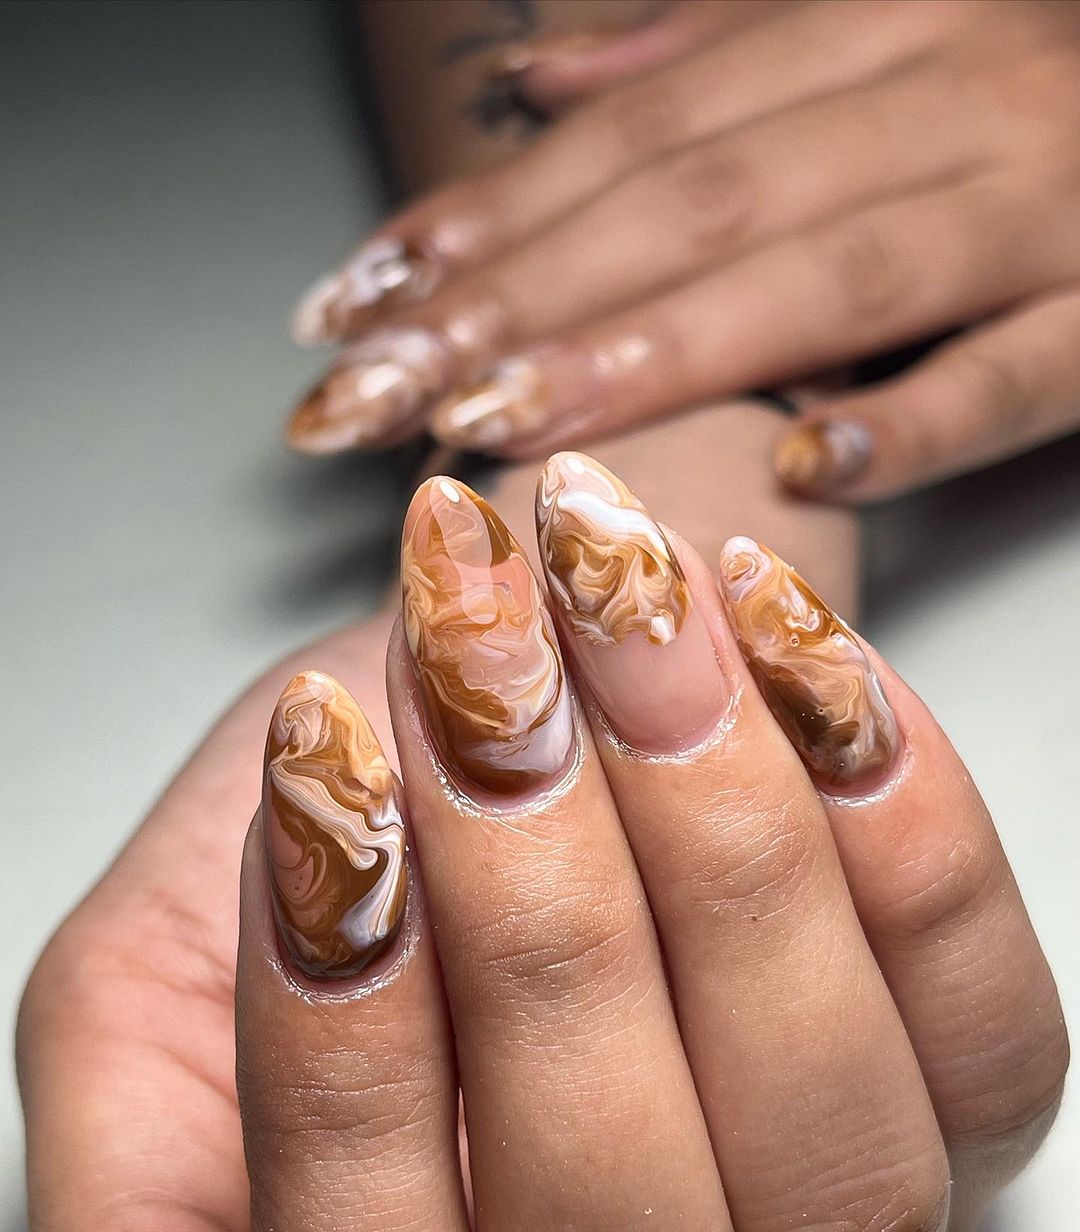 Brown and White Marble Nails